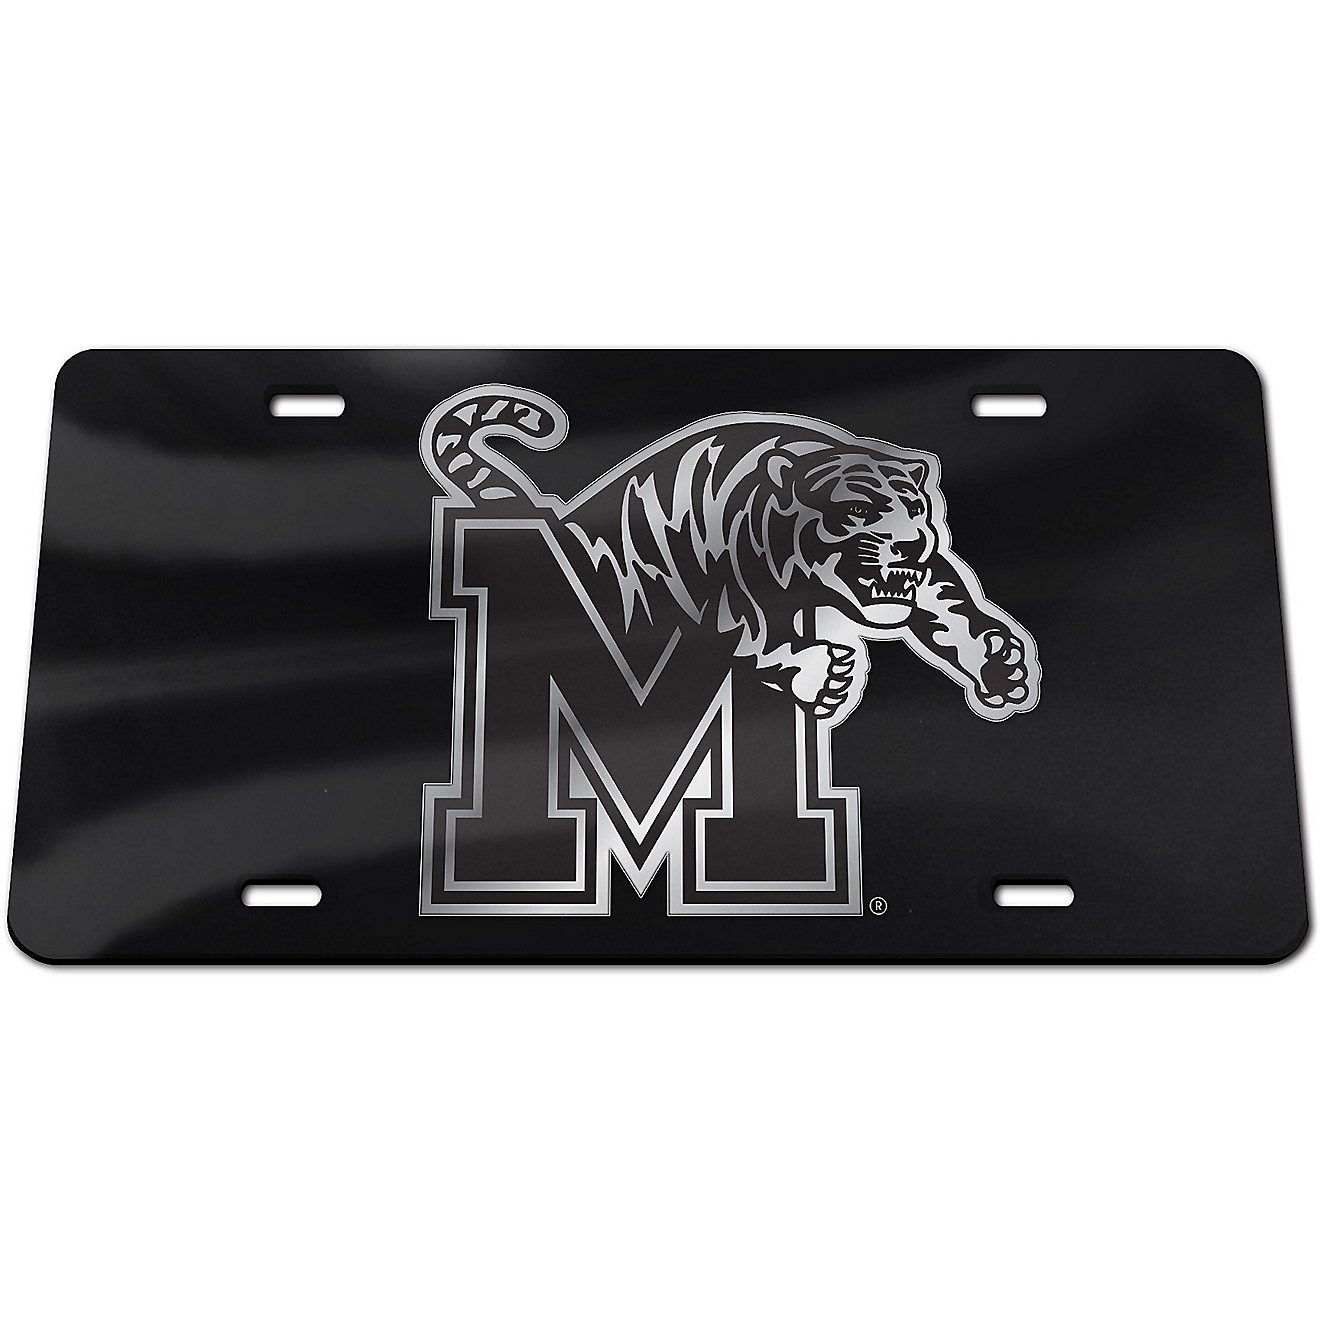 WinCraft University of Memphis Blackout License Plate                                                                            - view number 1